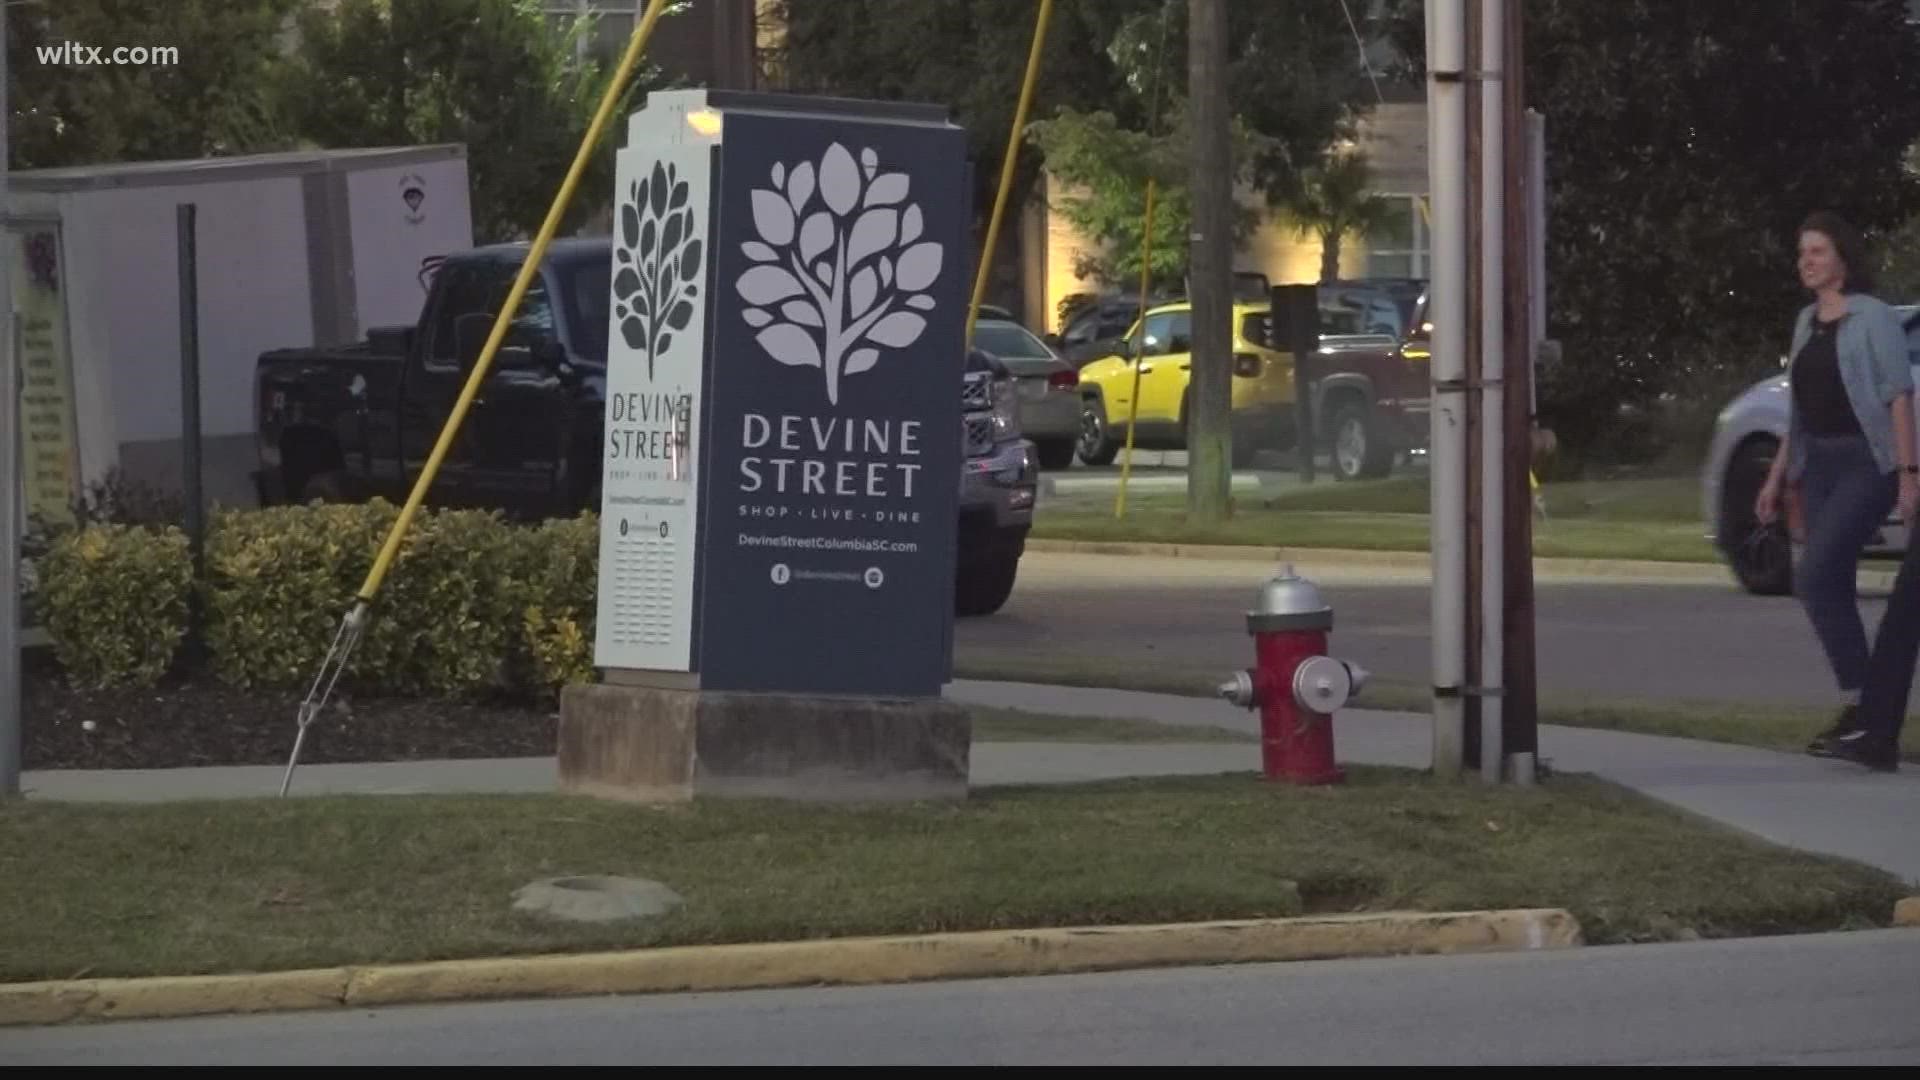 Columbia's Devine Street District continues to grow with new restaurants, apartments and shops opening.